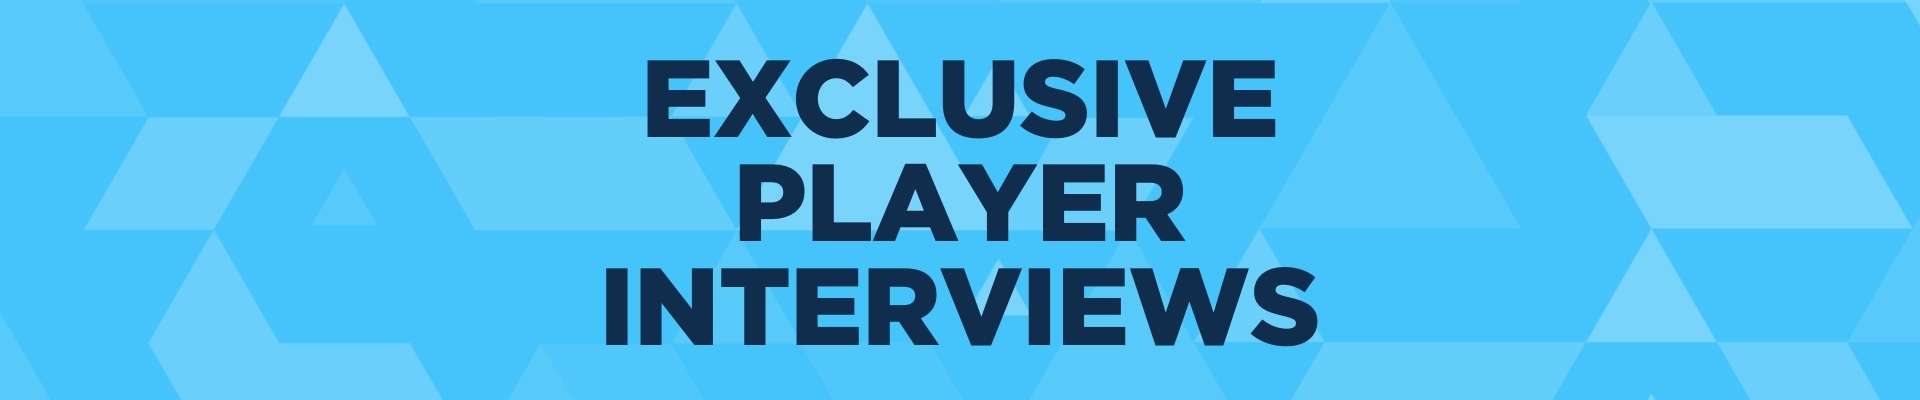 TLN Exclusive Player Interviews